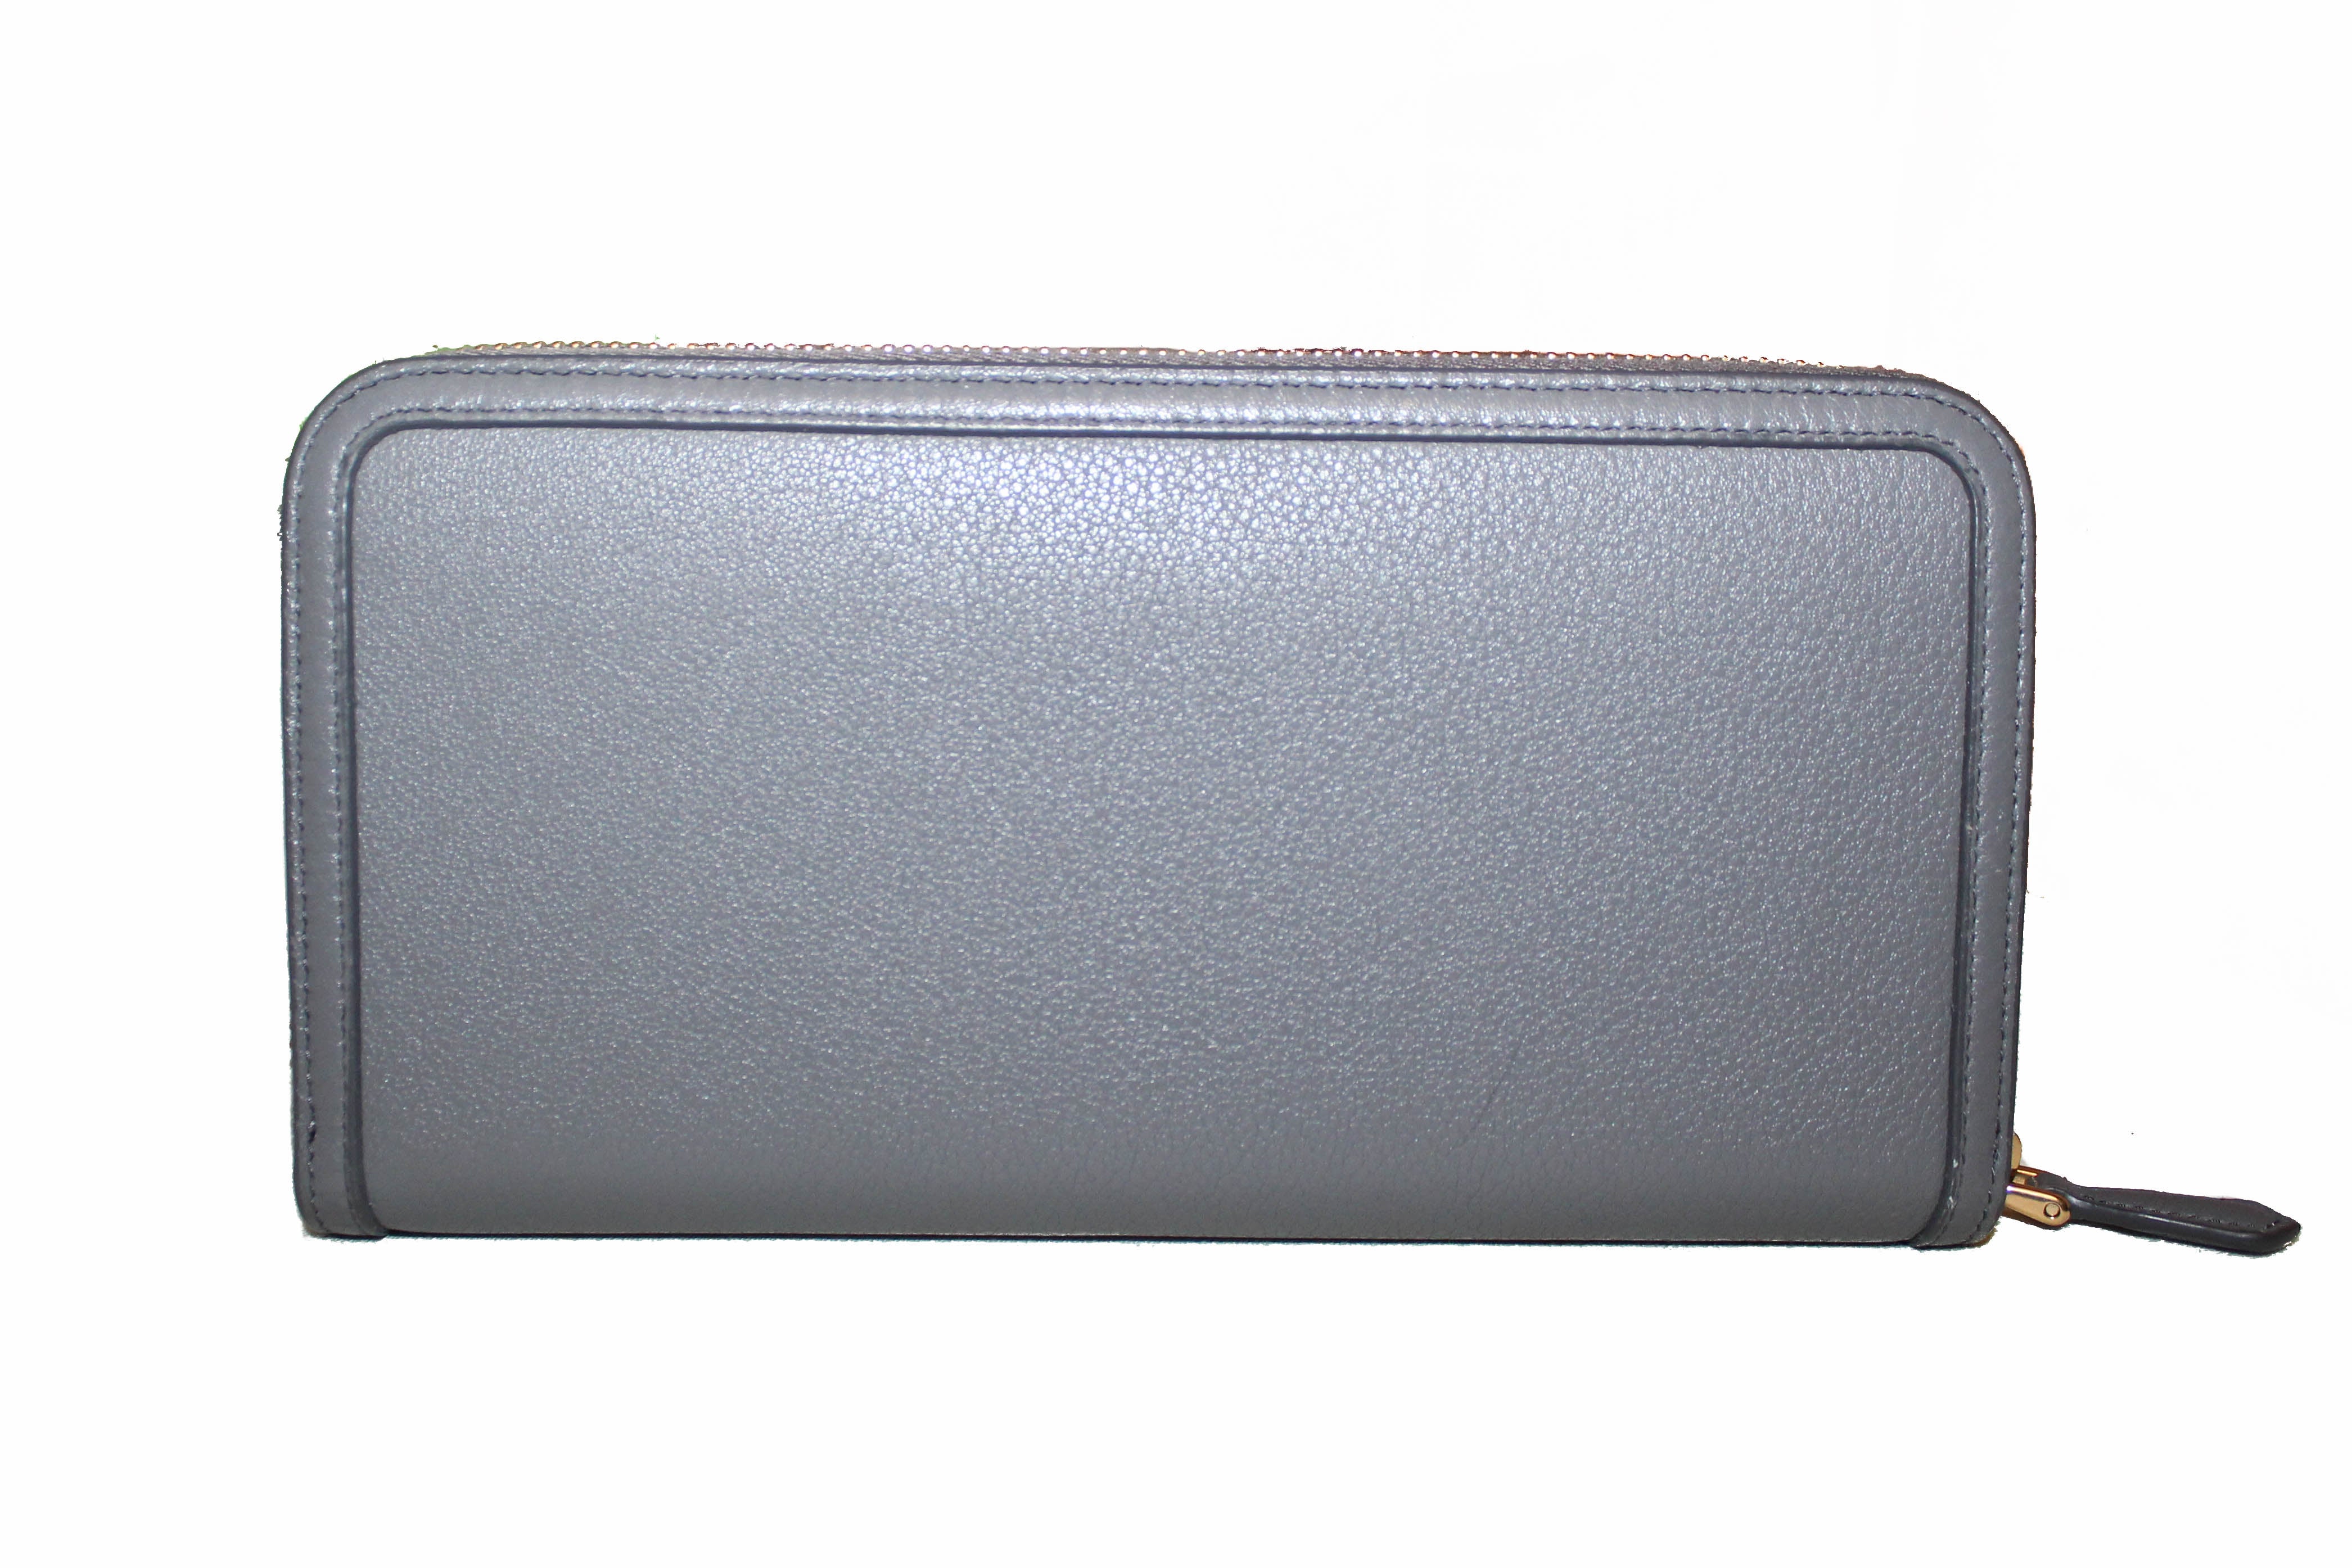 Authentic Prada Grey Women's Bow Detail Continental Leather Wallet